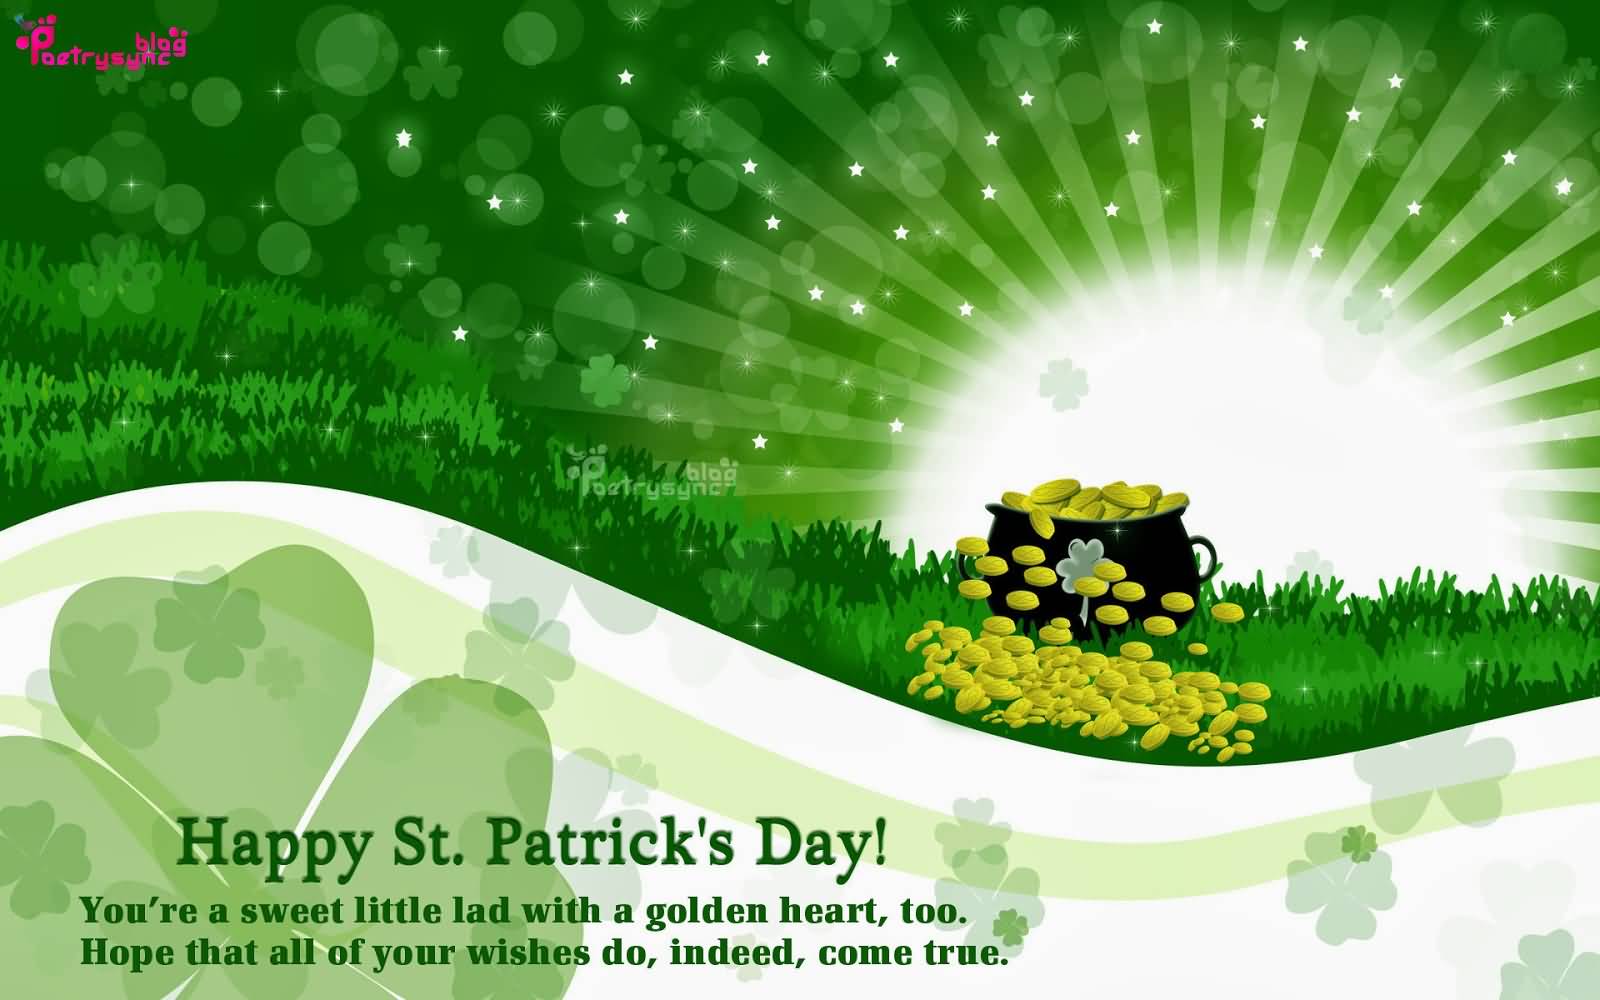 Happy Saint Patrick's Day You're A Sweet Little Lad With A Golden Heart